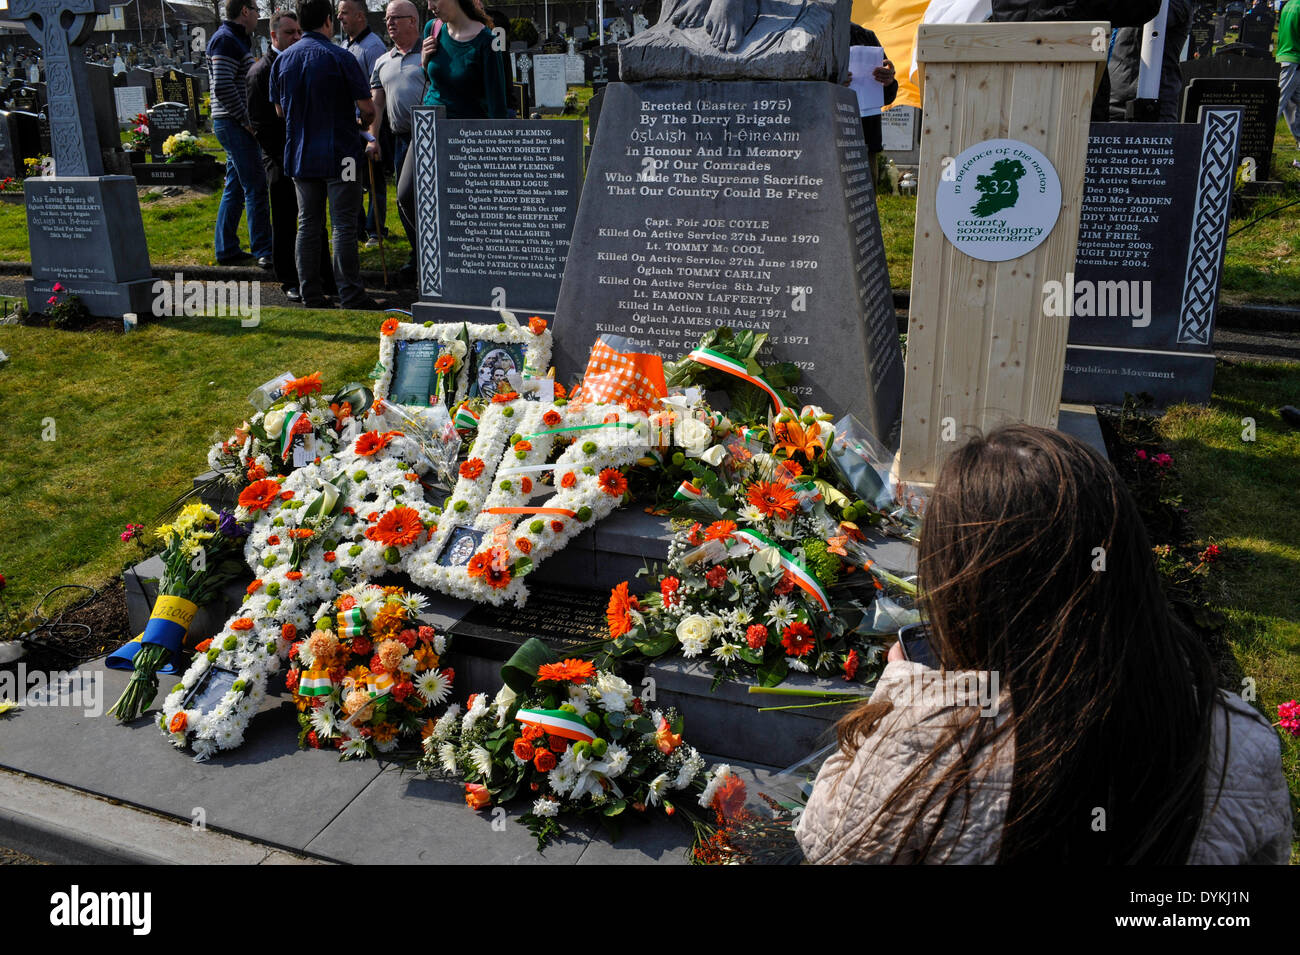 Derry, Londonderry, Northern Ireland. 21st April, 2014. Dissident Republicans Commemorate Easter Rising. A young girl taking photographs of wreaths laid at the republican plot during the Irish republican 32 County Sovereignty Movement parade in the City Cemetery in Derry. Credit: George Sweeney/Alamy Live News Stock Photo